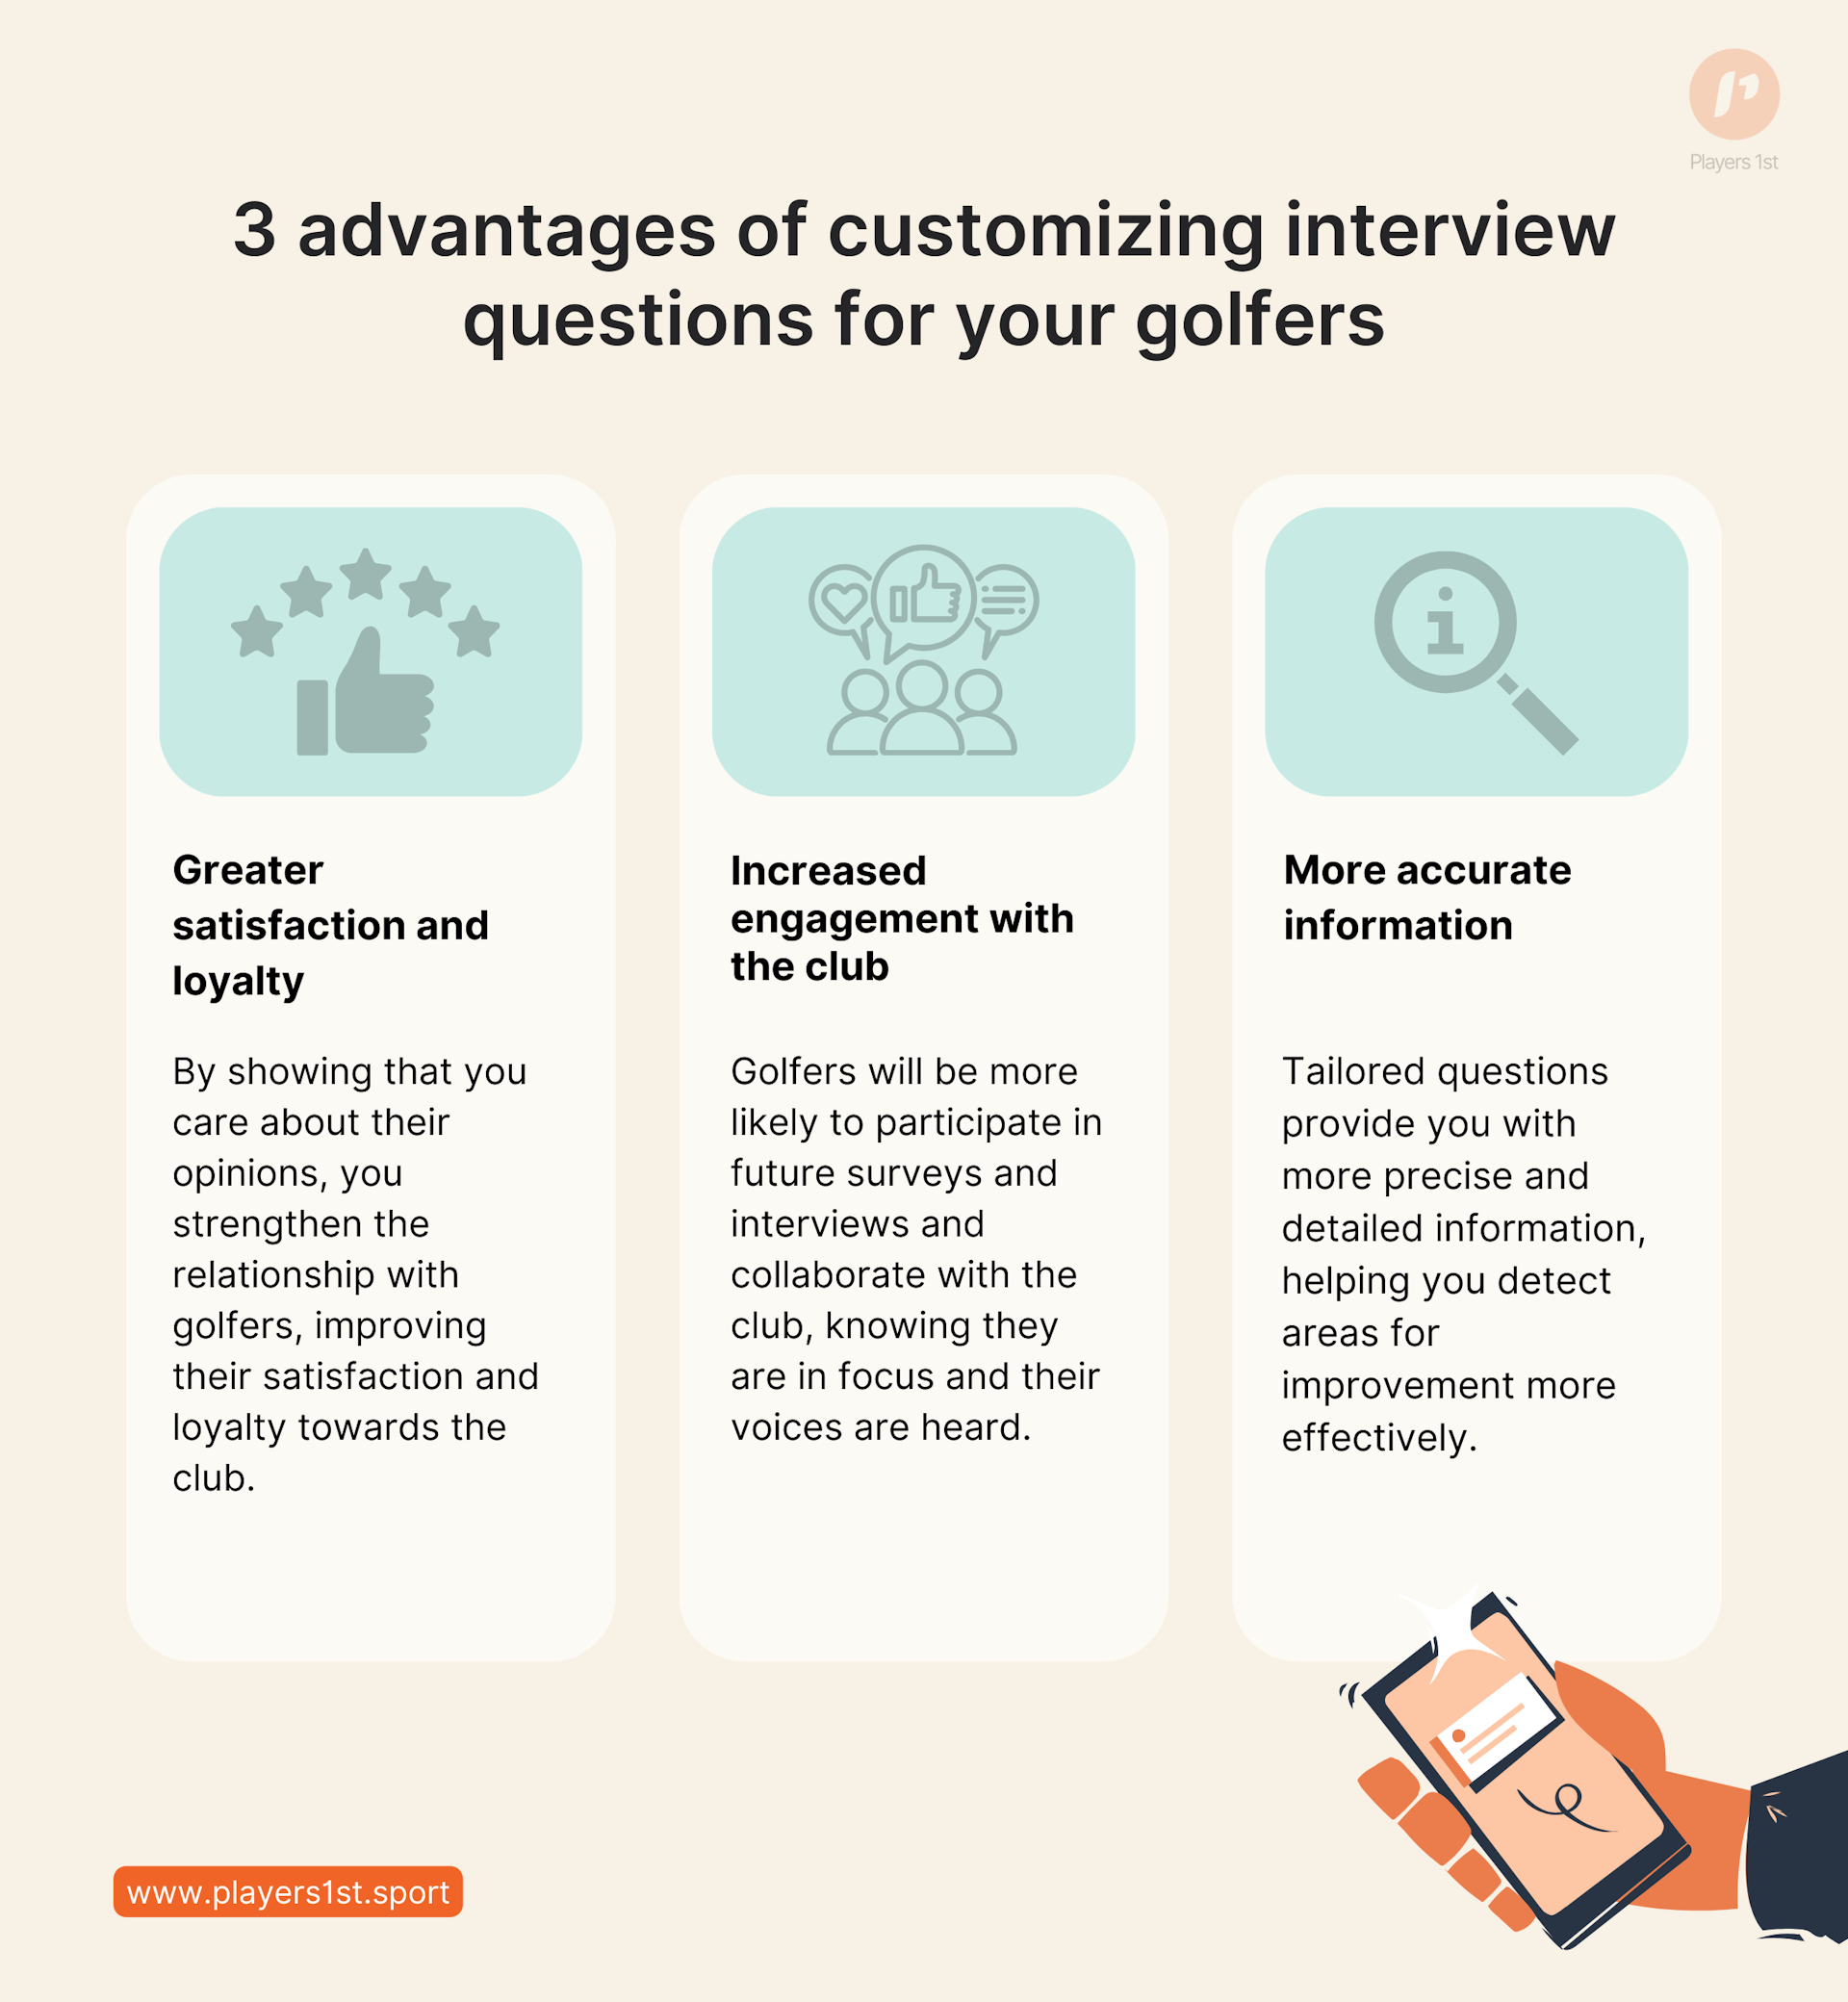 Figure 1: 3 advantages of customizing interview questions for your golfers